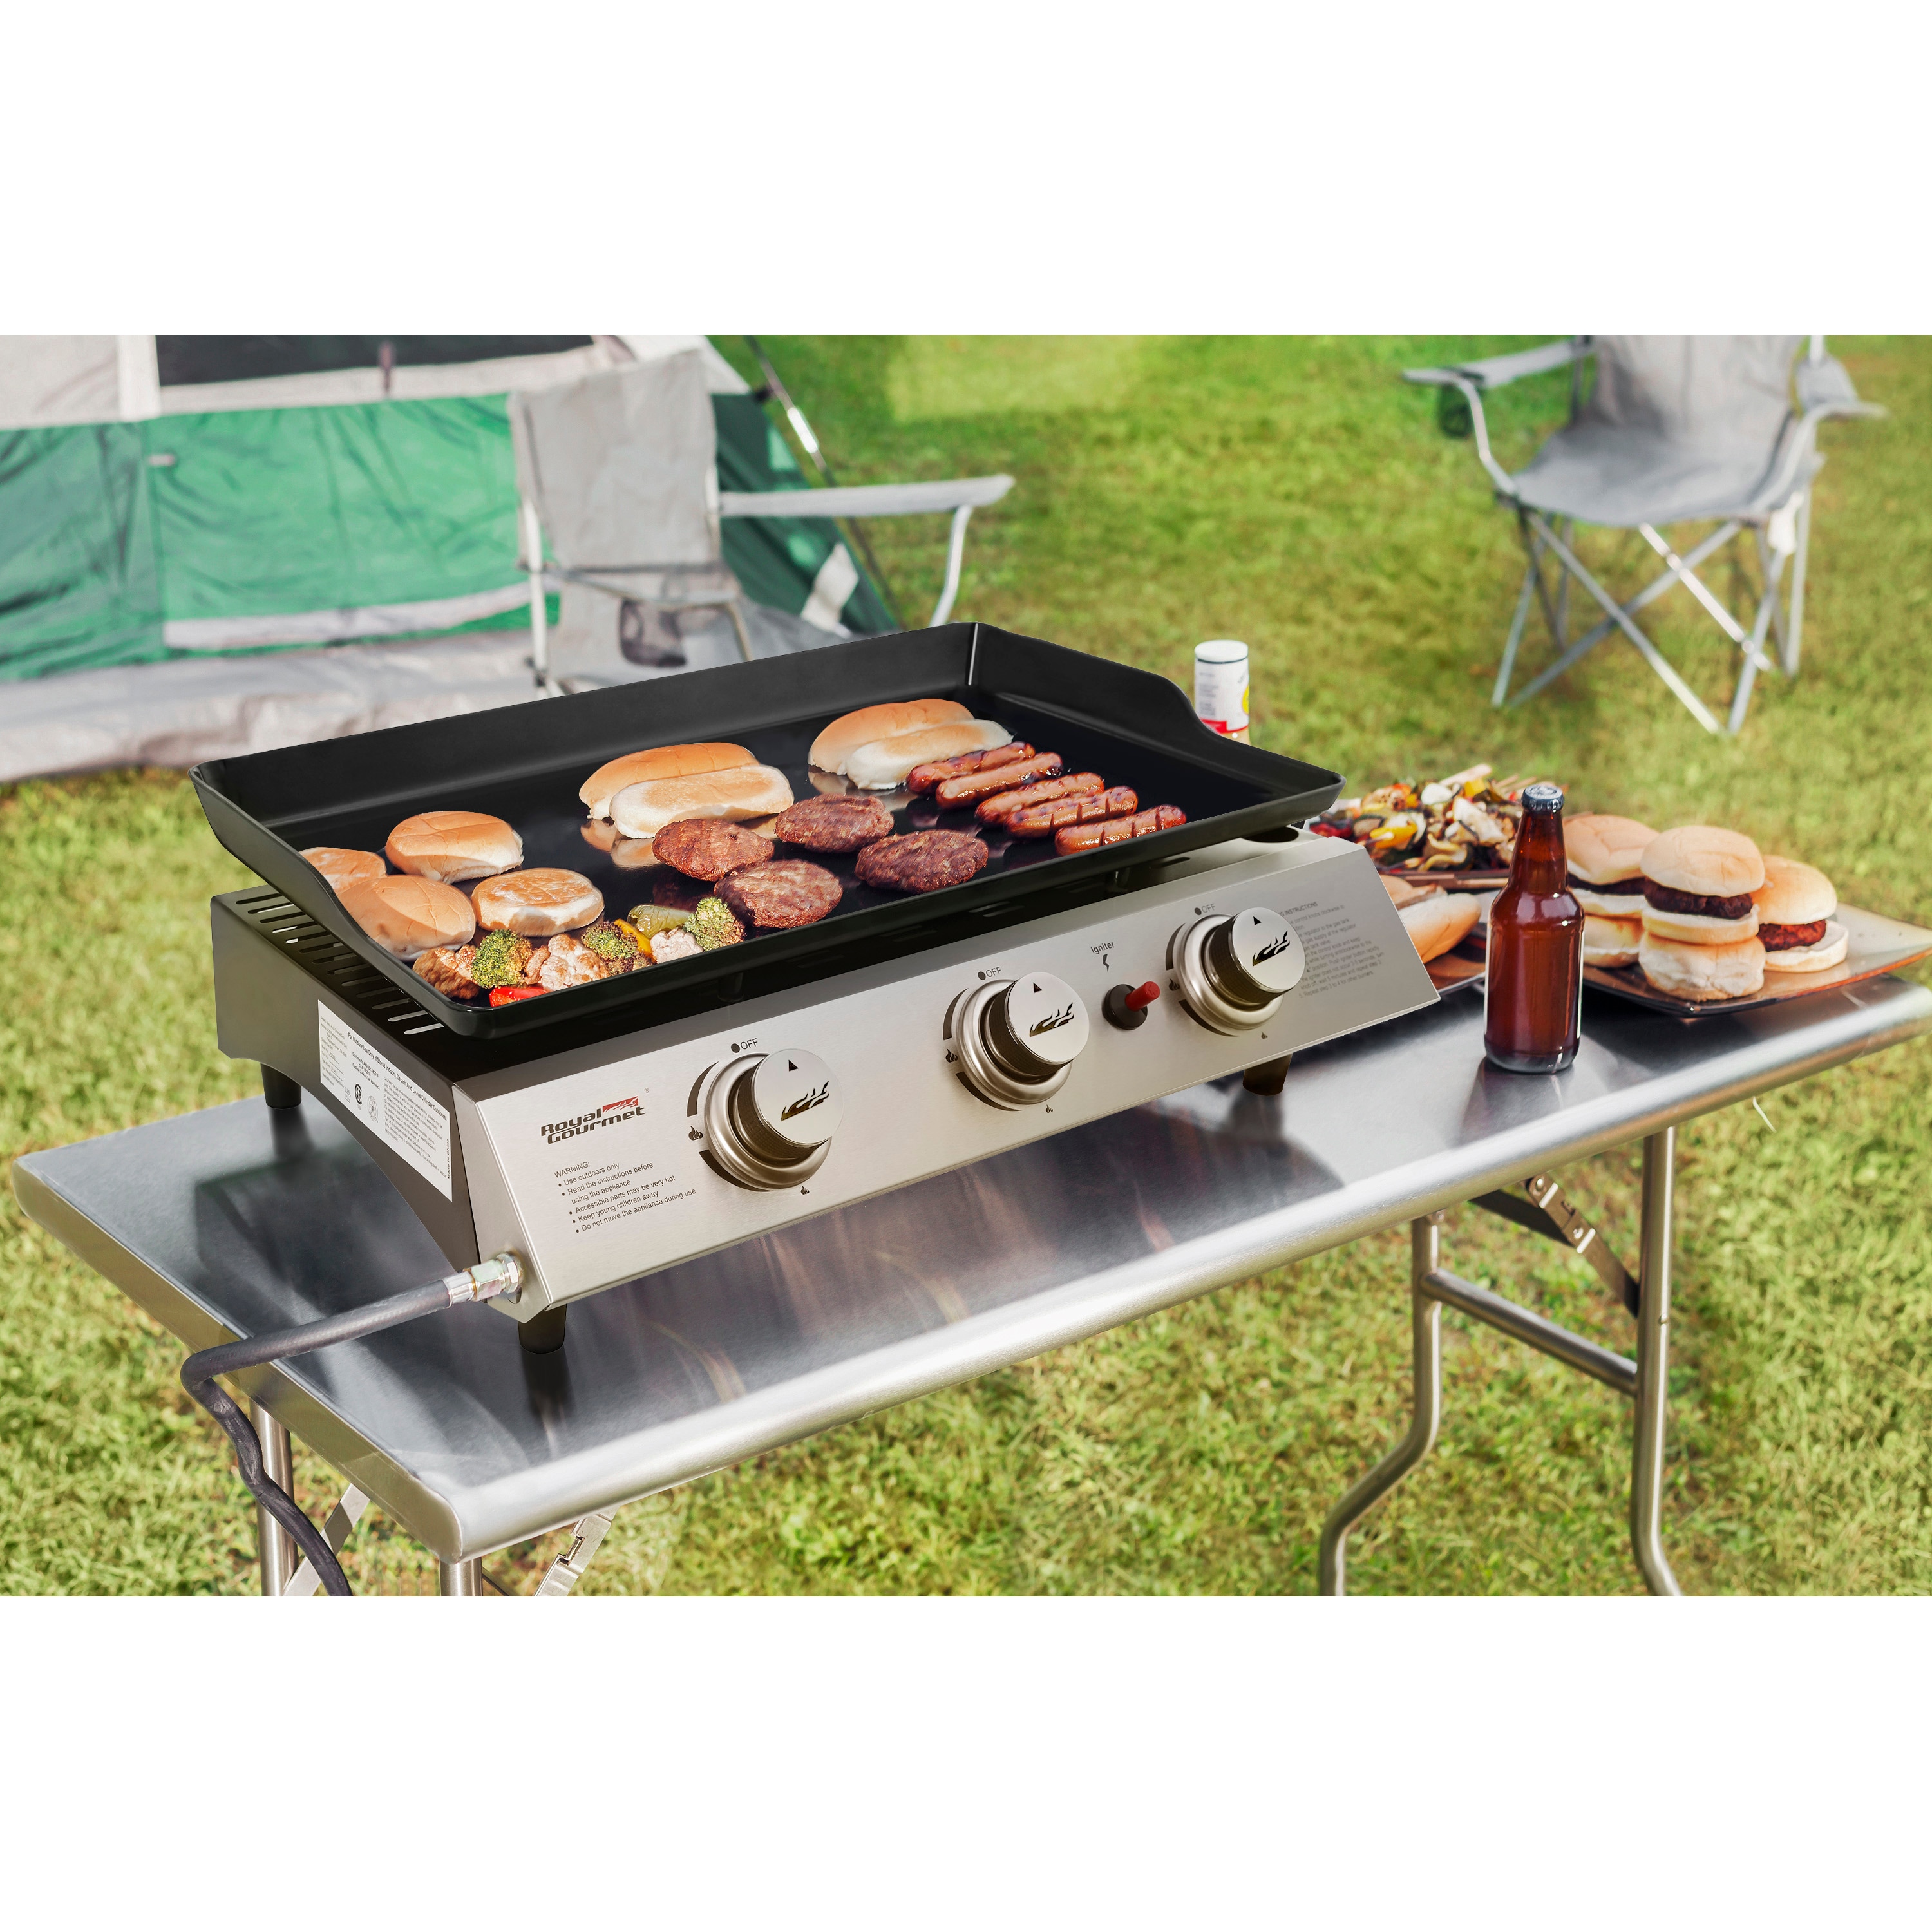 4-Burner Portable GAS Grill and Griddle Combo | Royal Gourmet